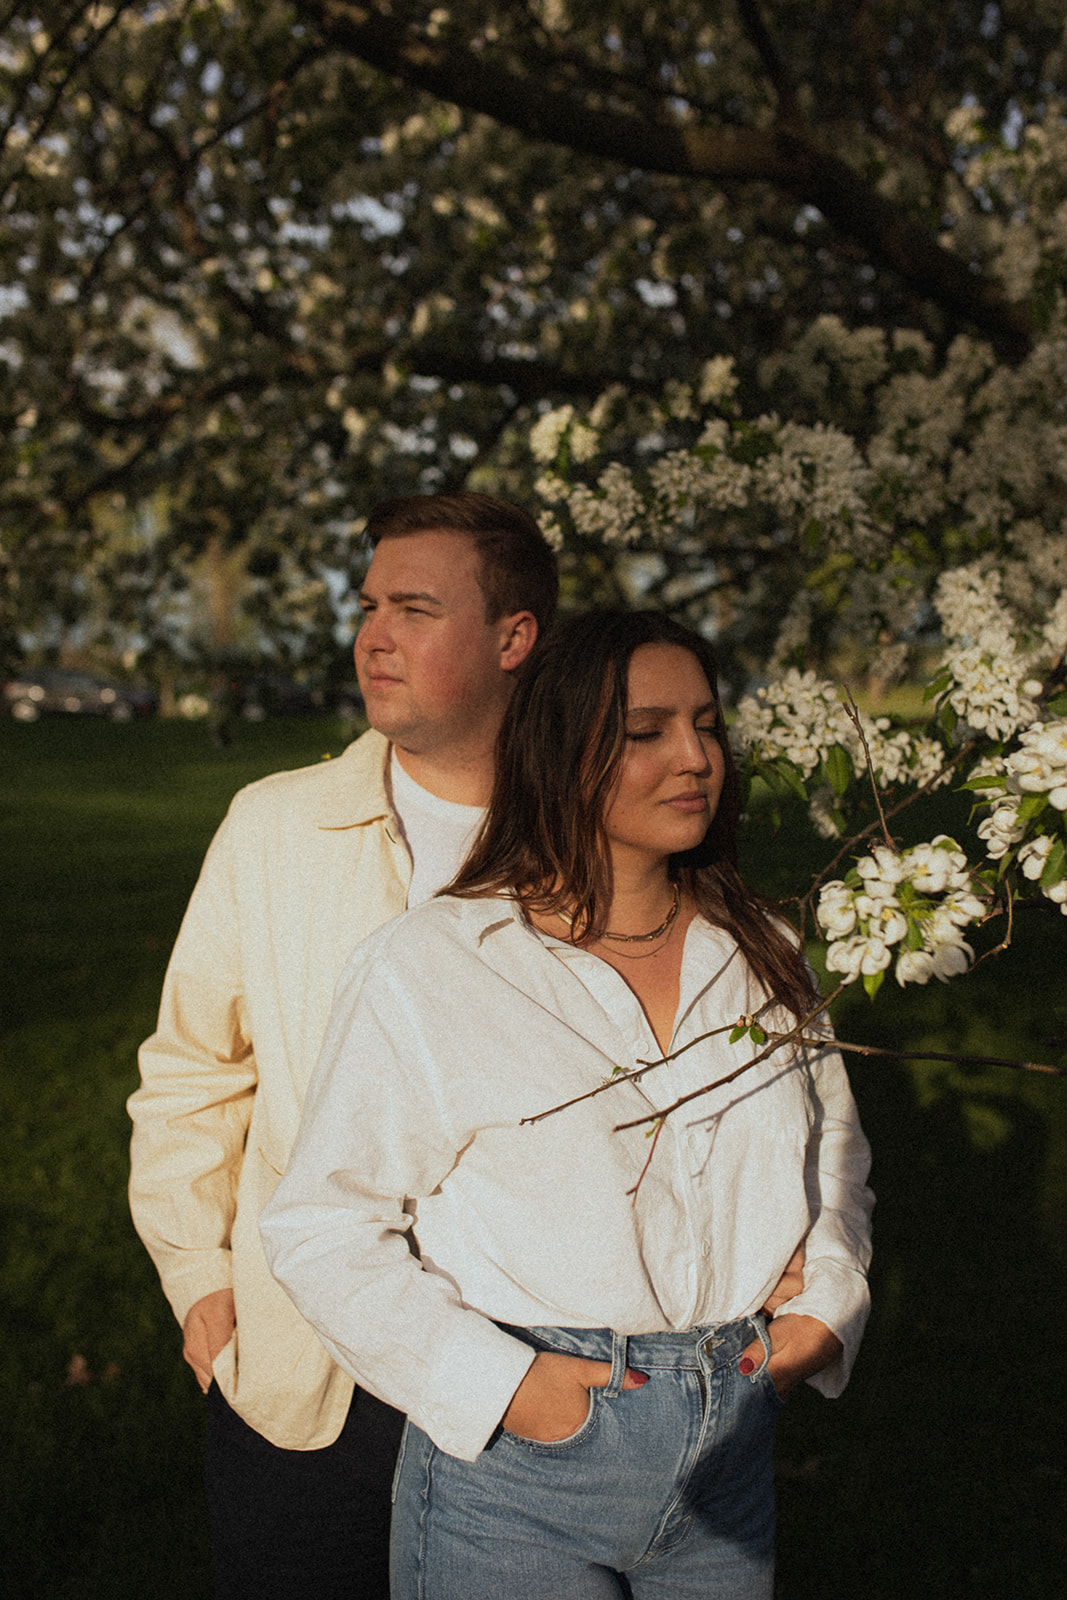 couple standing together under flowering trees in the sunlight during sunrise